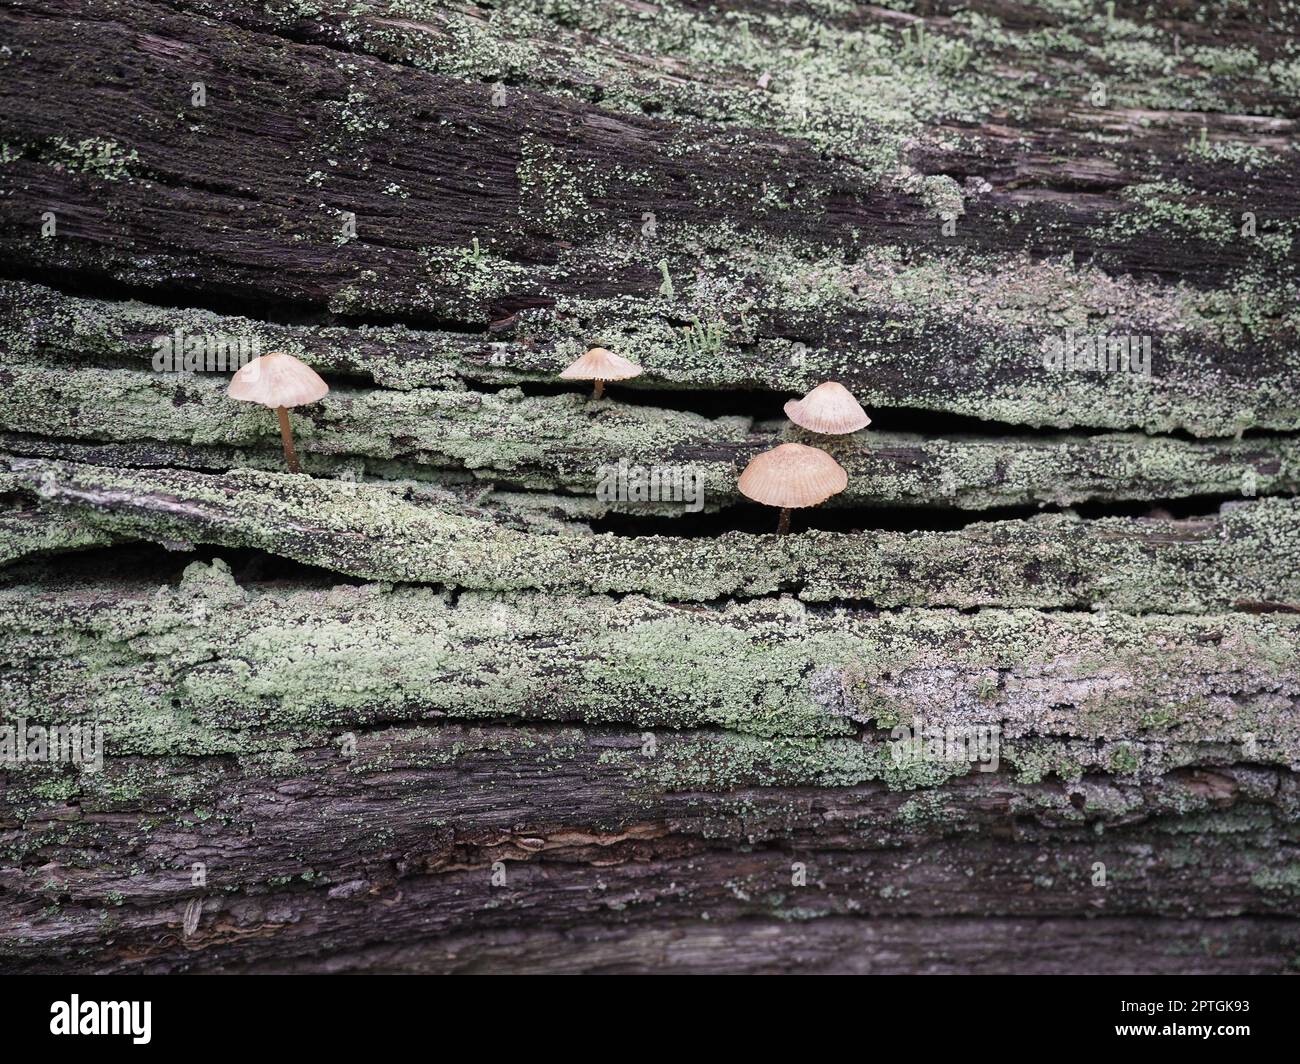 wood decay xylophagous fungus growing on dead tree Stock Photo